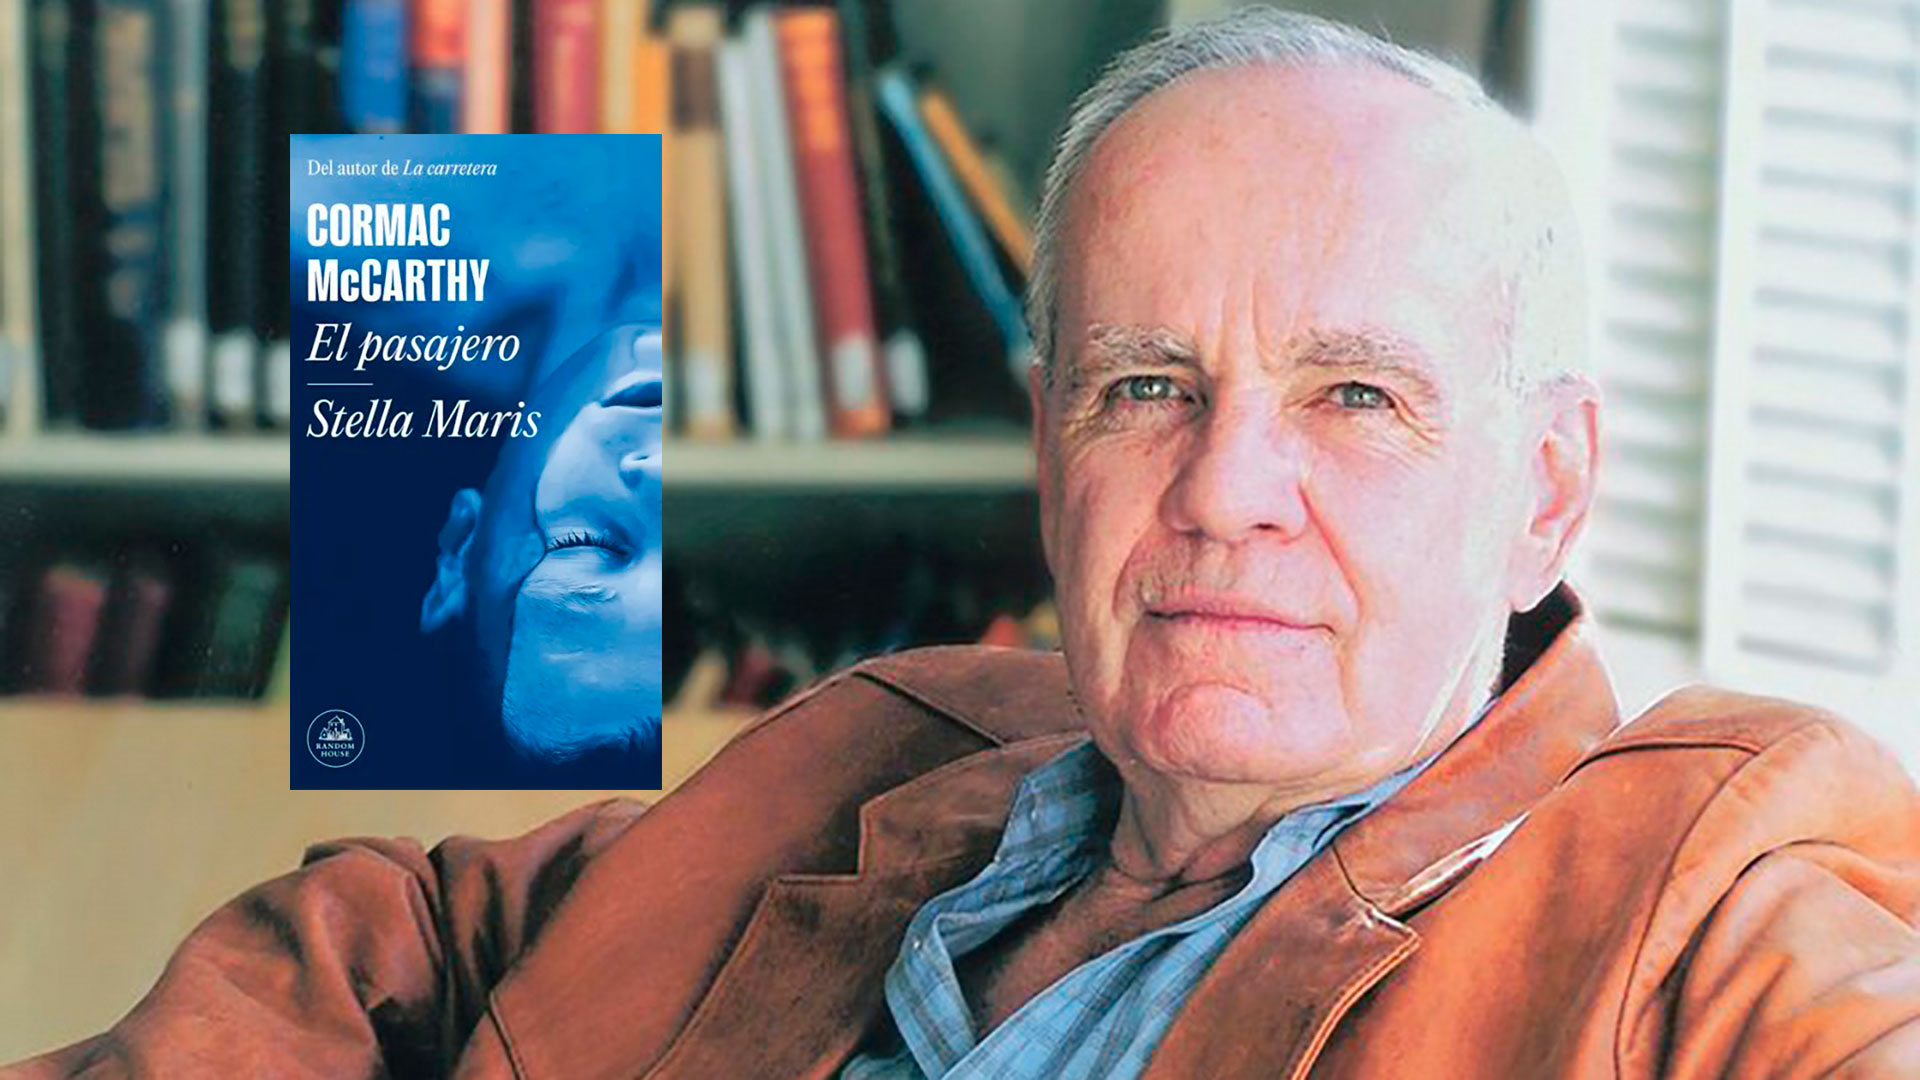 "The passenger"the first book by American Cormac McCarthy in 16 years, was published in Spanish together with "Stella Maris"a novella consisting solely of dialogue.